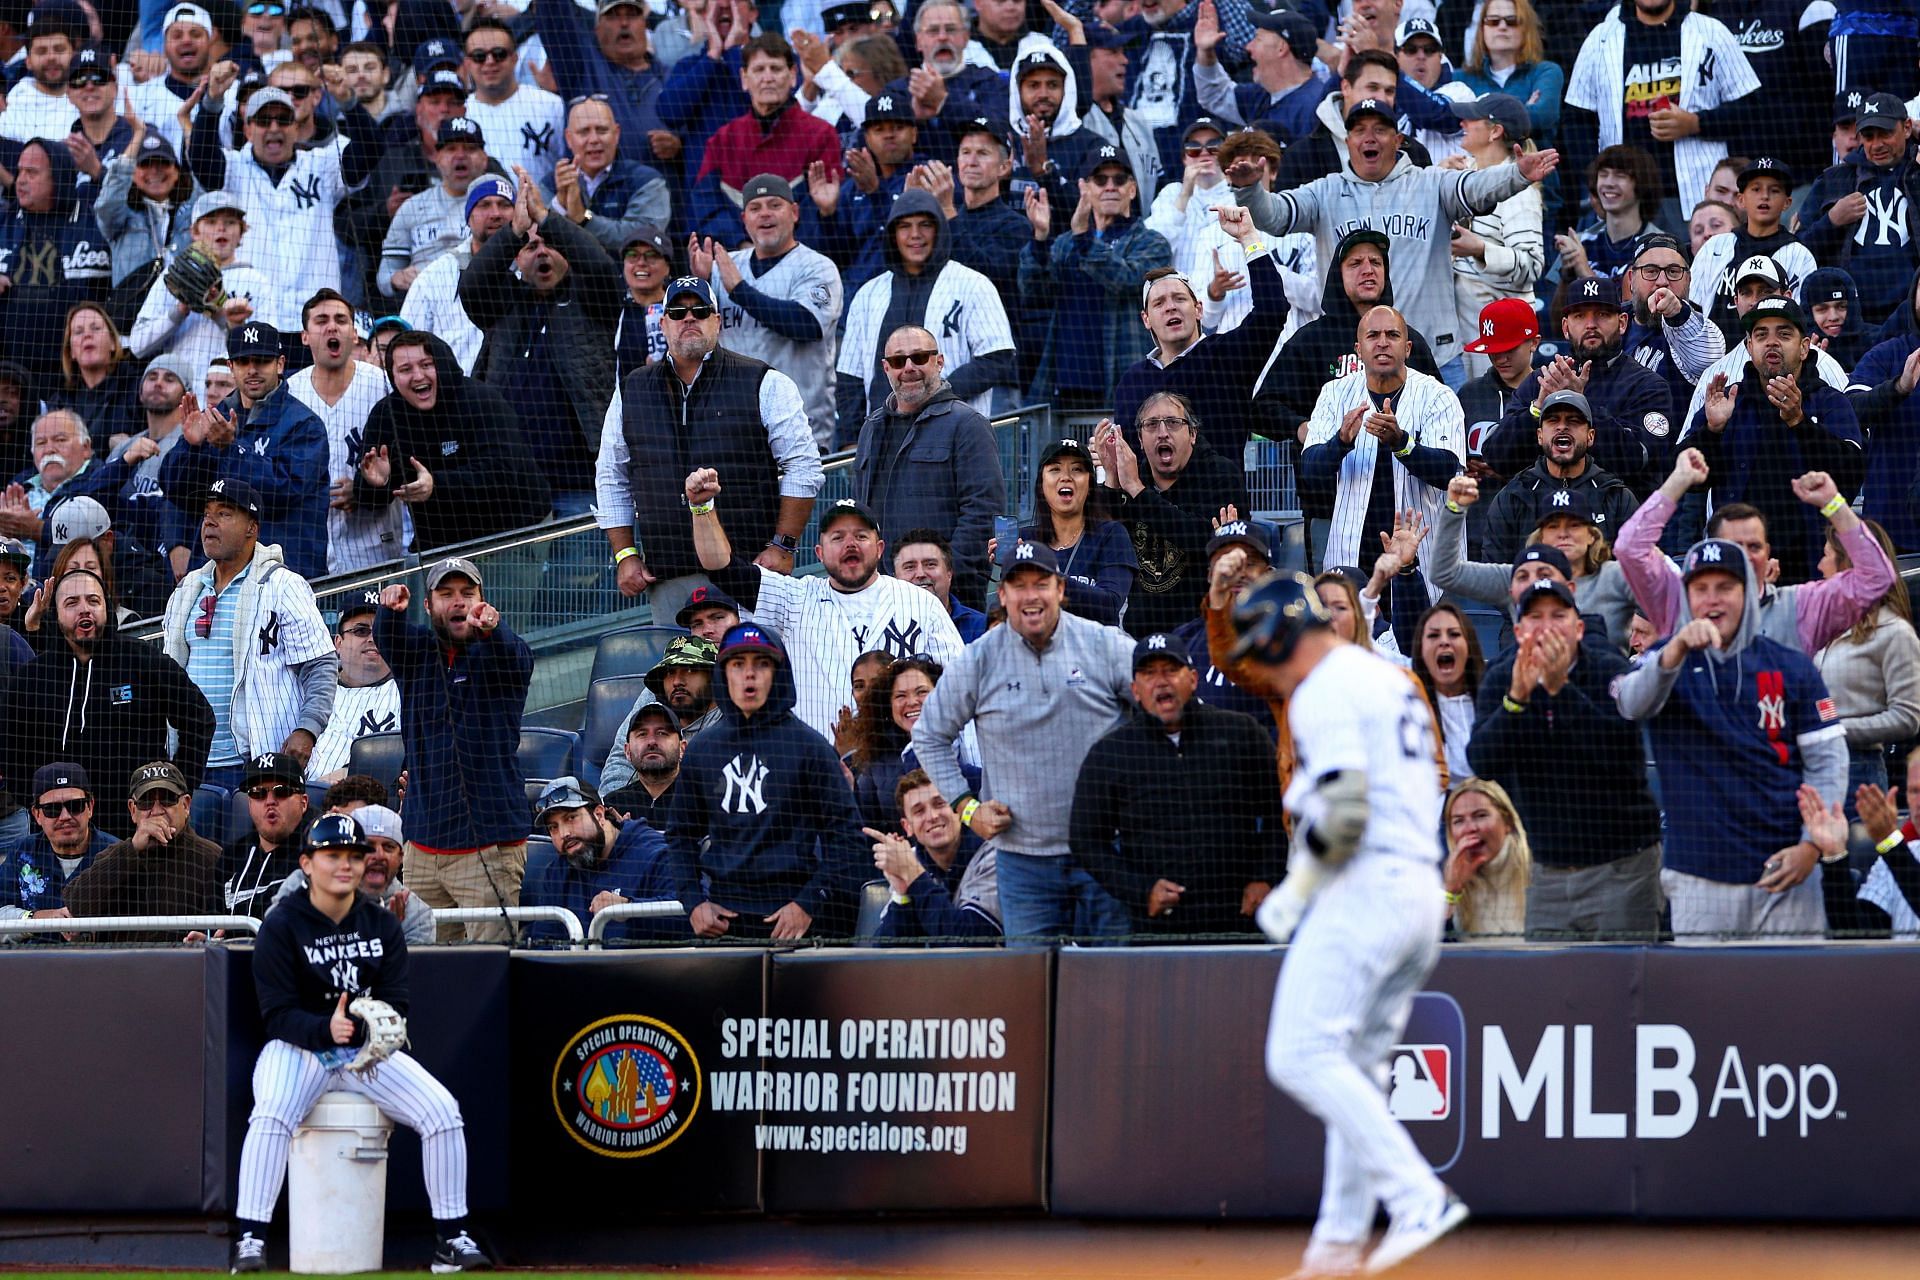 Yankees fans go into frenzy as team announces first advertisement uniform  patch: 'I want to throw up